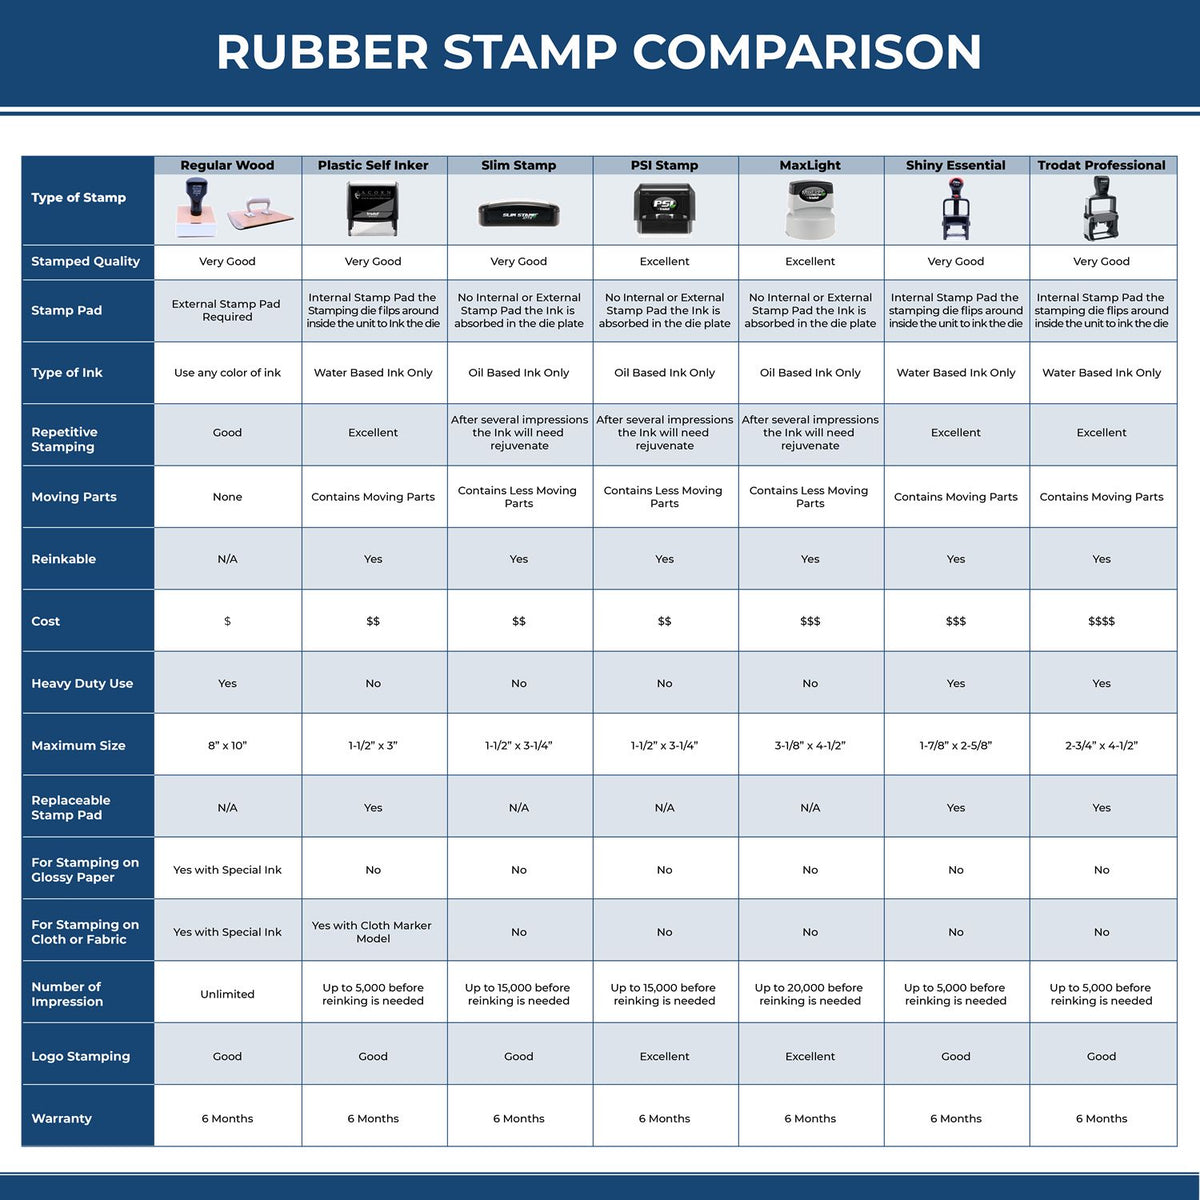 Large Times Faxed Rubber Stamp 4857R Rubber Stamp Comparison